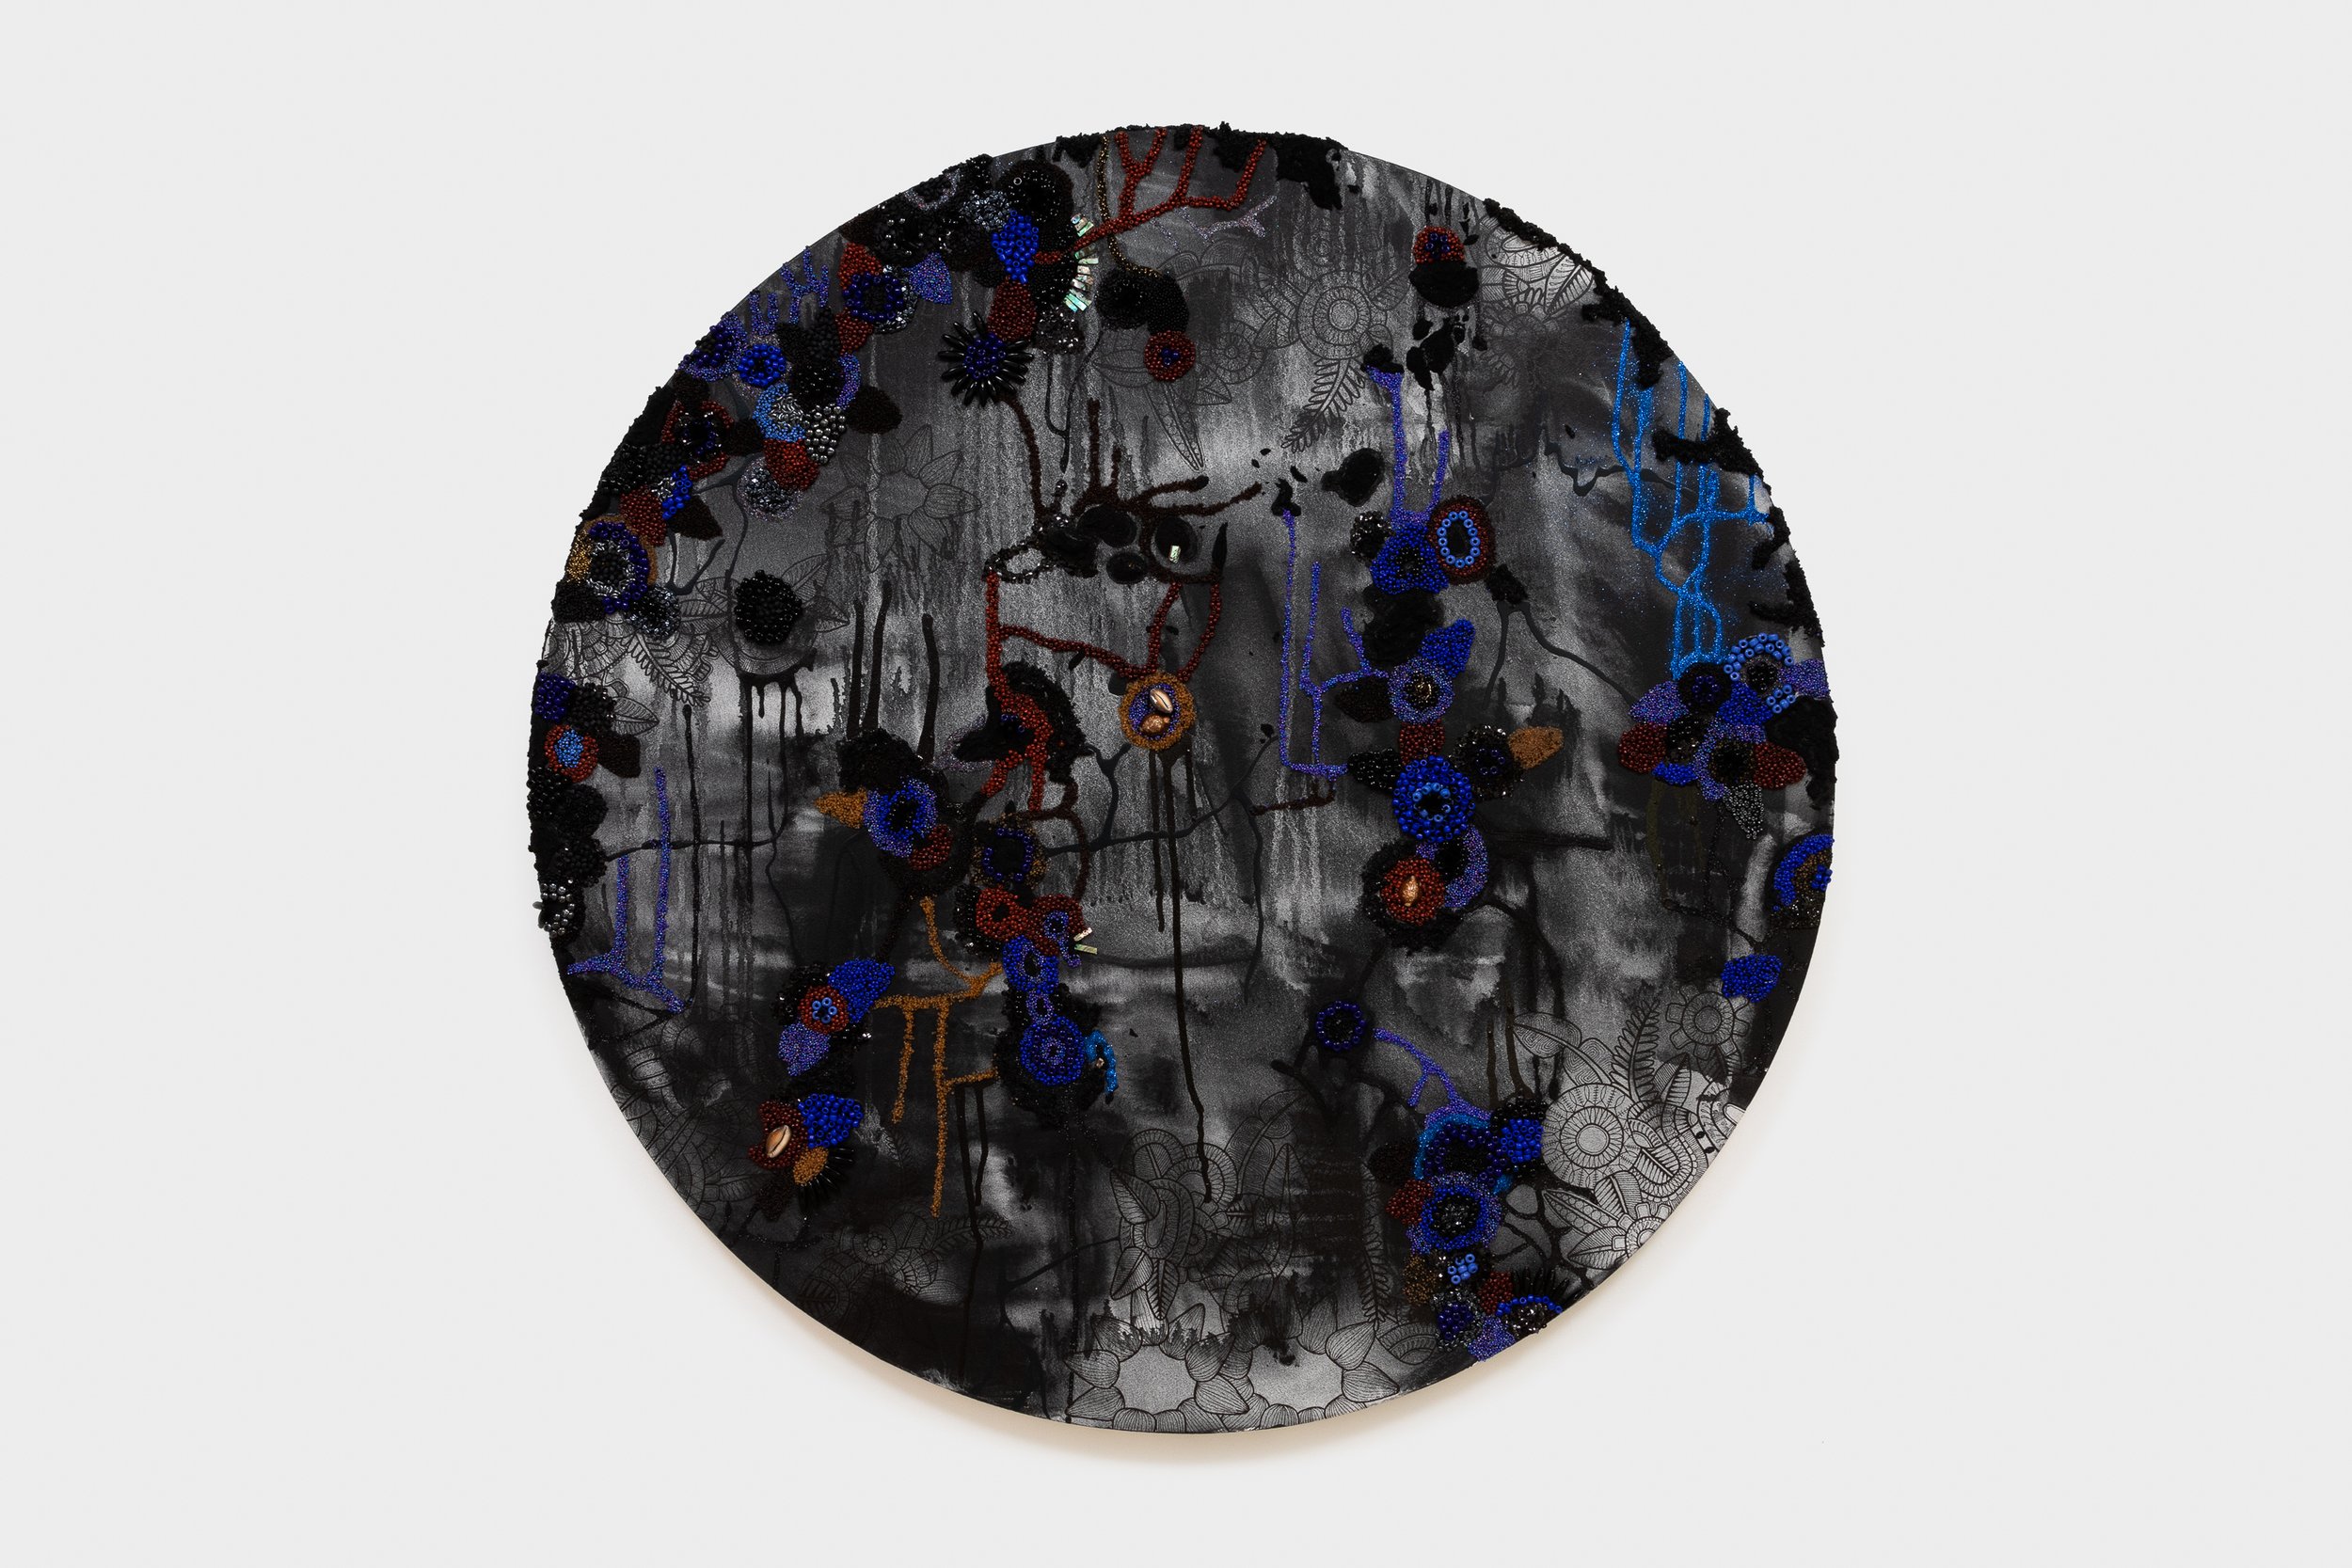  Stay Where I Can See You   2023  48 diameter inch  Oil, acrylic, glitter, glass seed beads, pumice, bone, cowries, gun metal, and black sand on canvas  